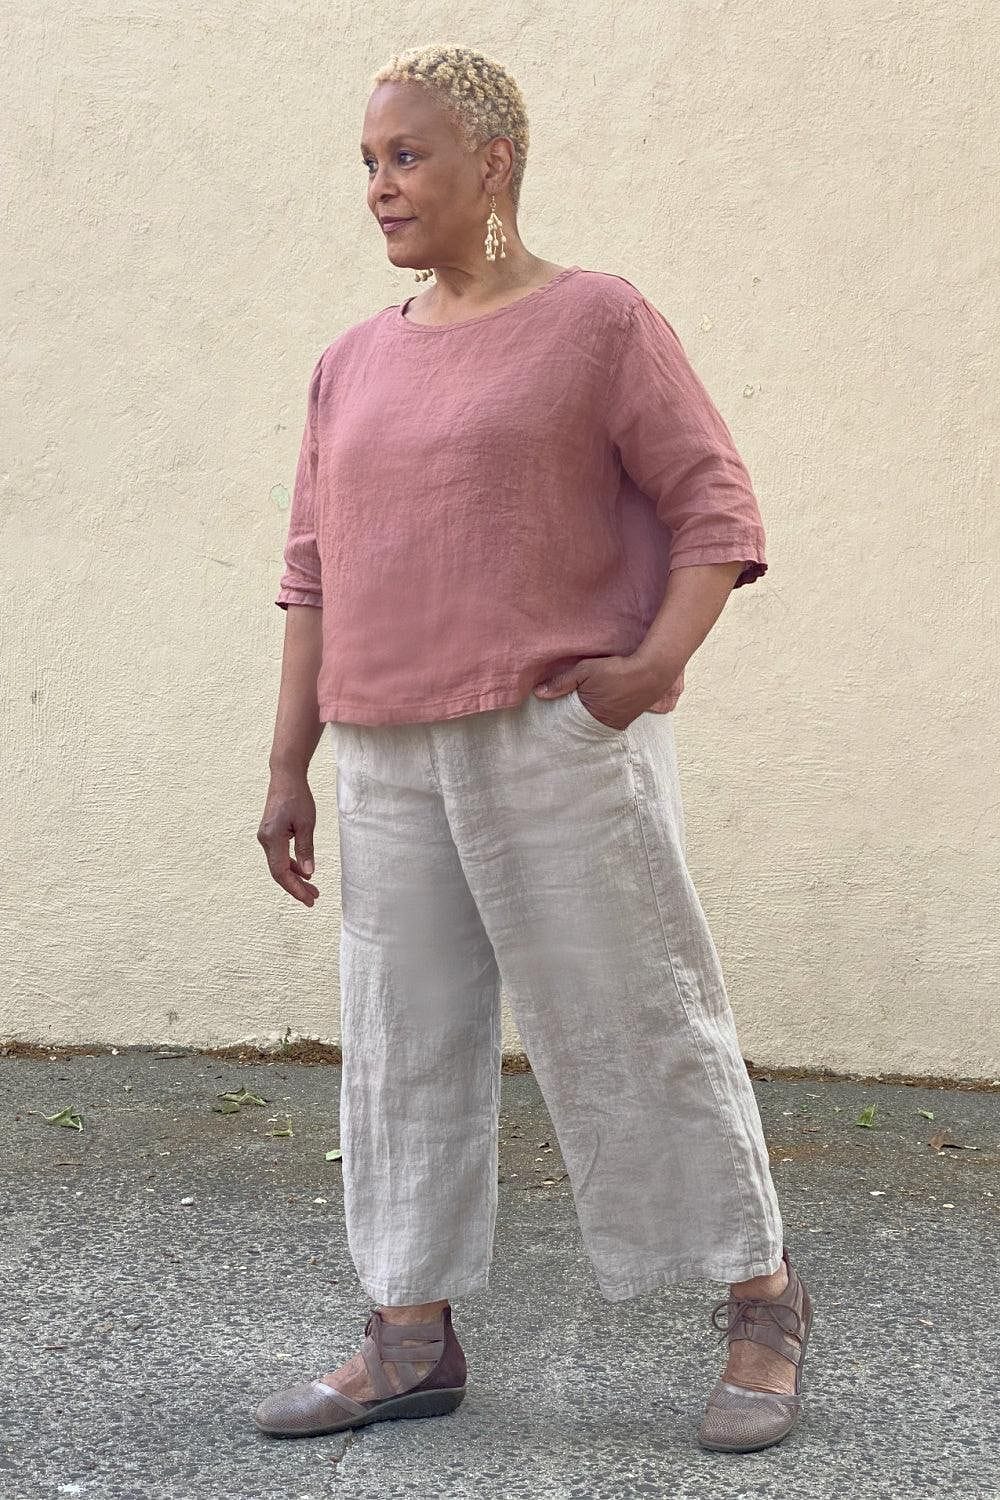 Attractive older woman with short cropped hair wearing an Elbow Sleeve Linen Top in a pretty pinkish color. She is also wearing natural color linen full cut crop pants.She is standing outside.